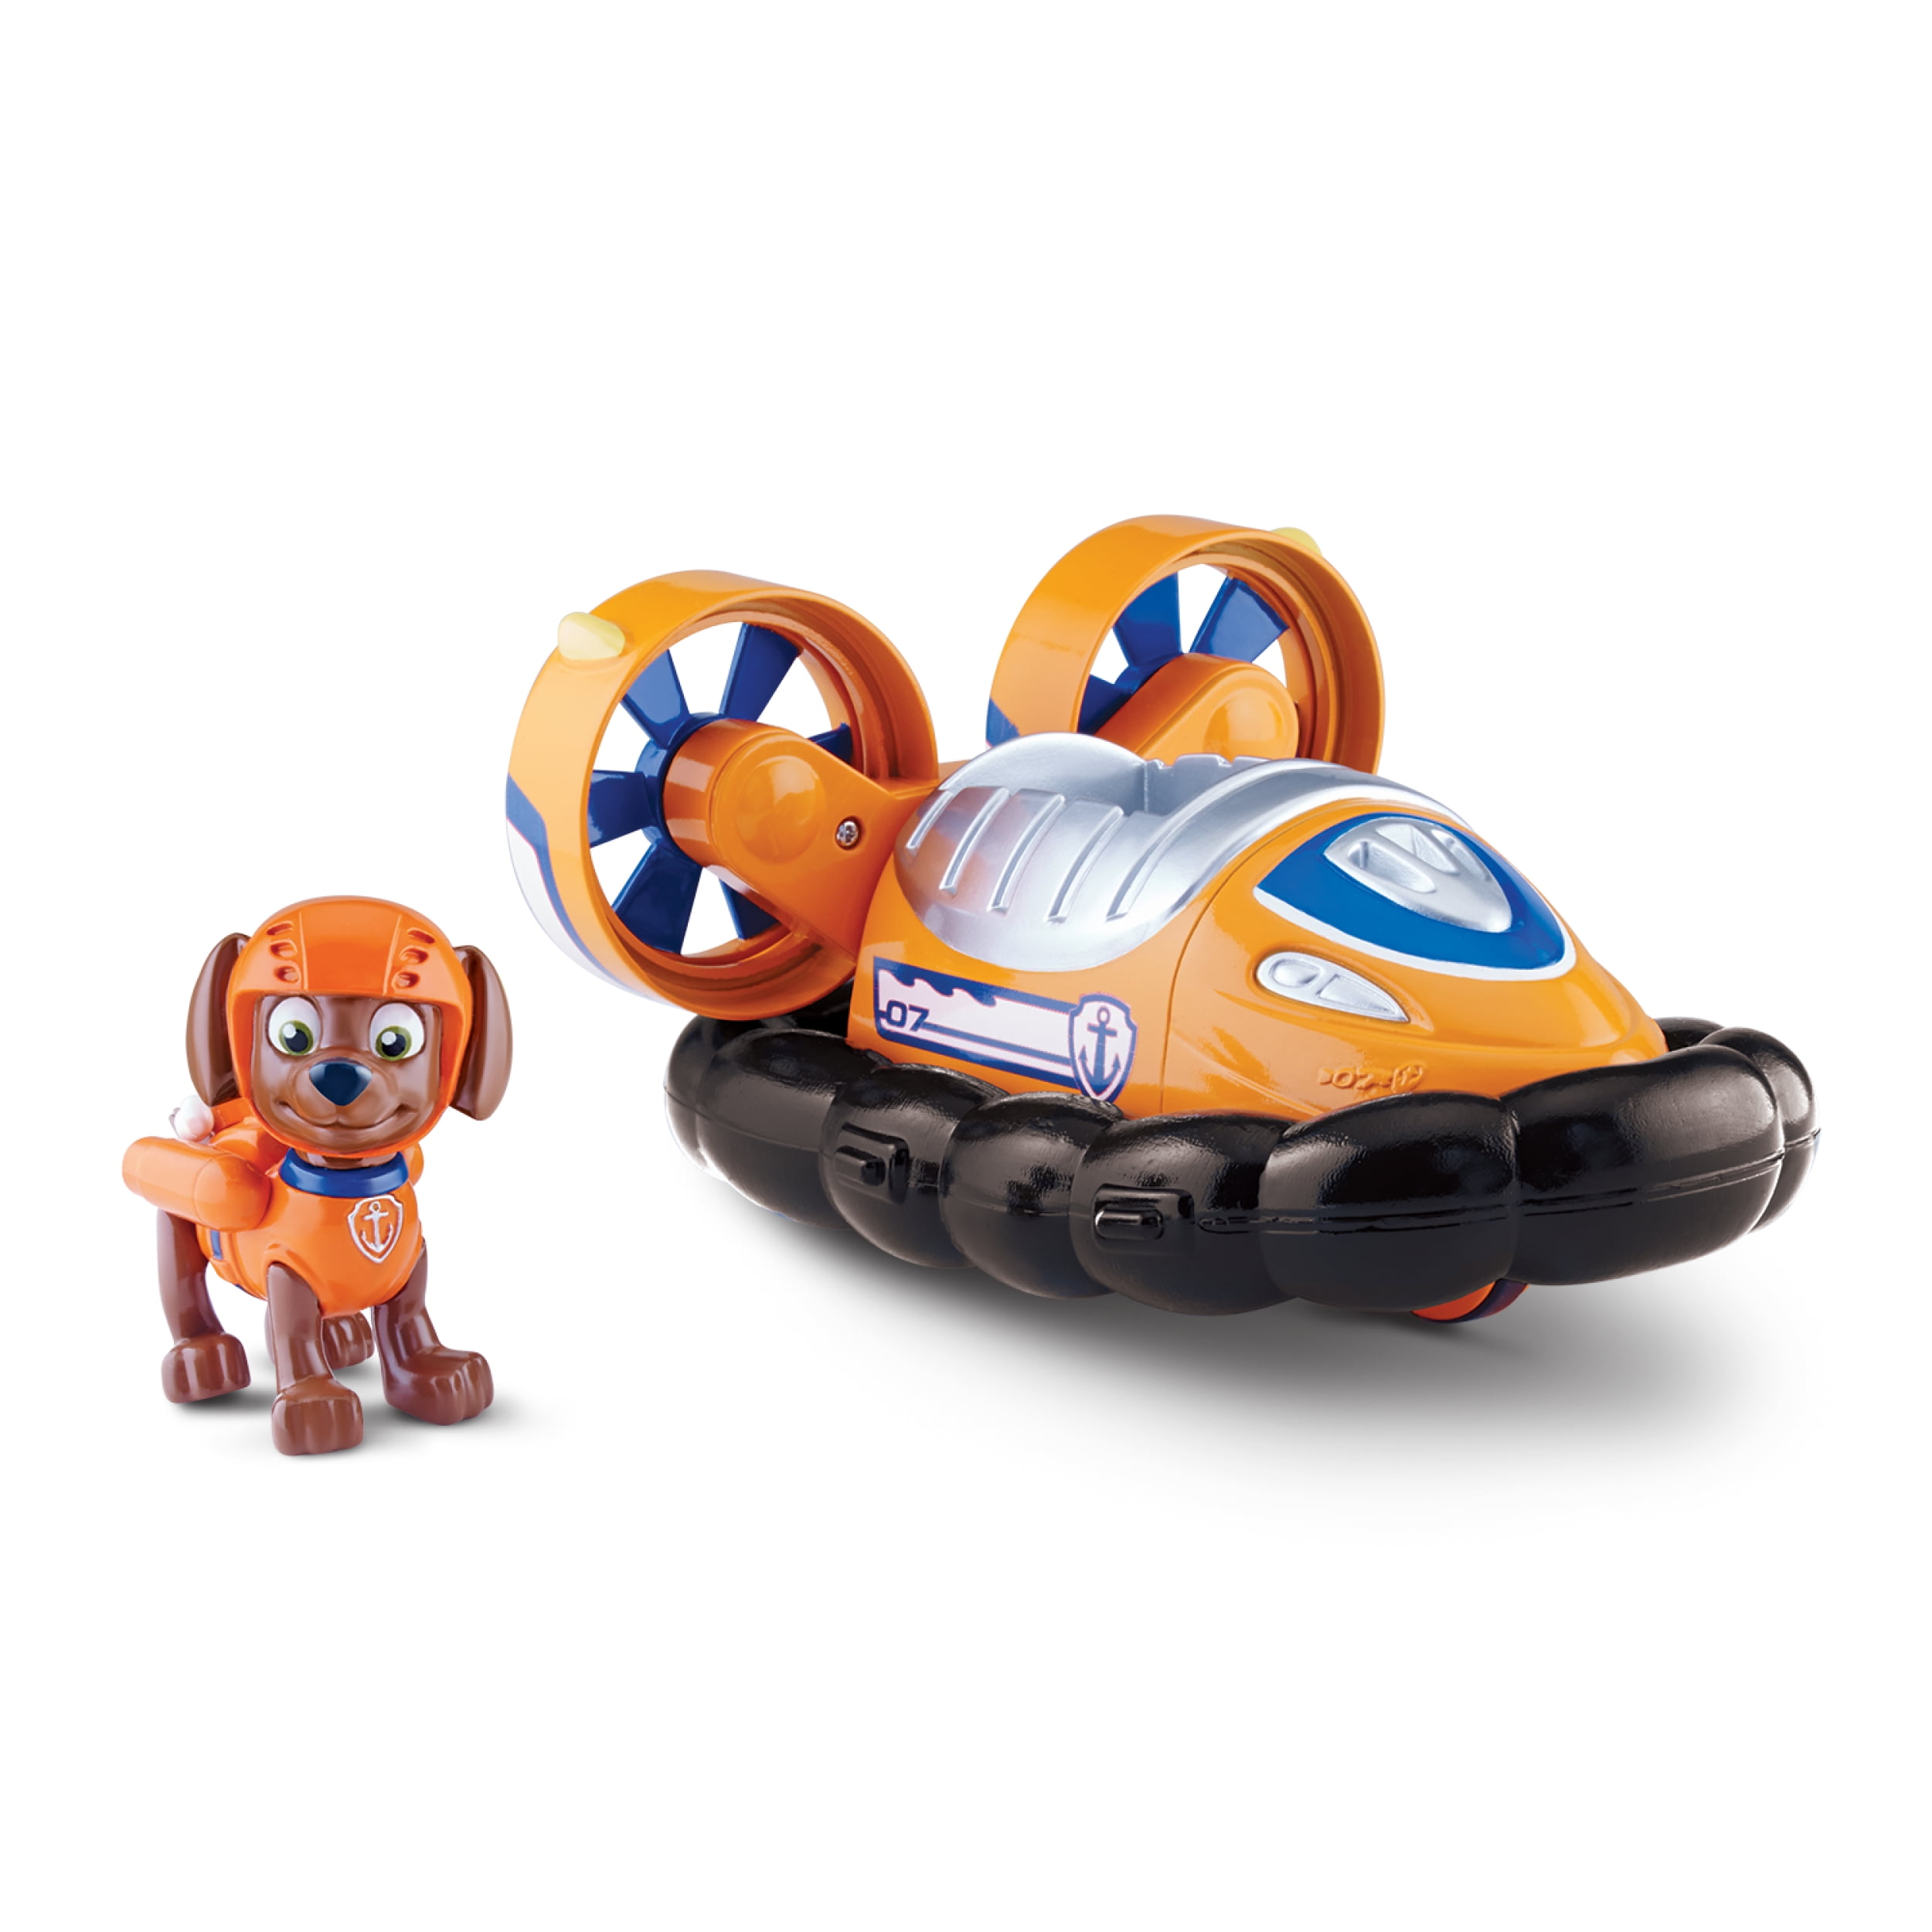 Zuma & Rescue Hovercraft PAW Patrol Action Figure Vehicle Mighty Pups